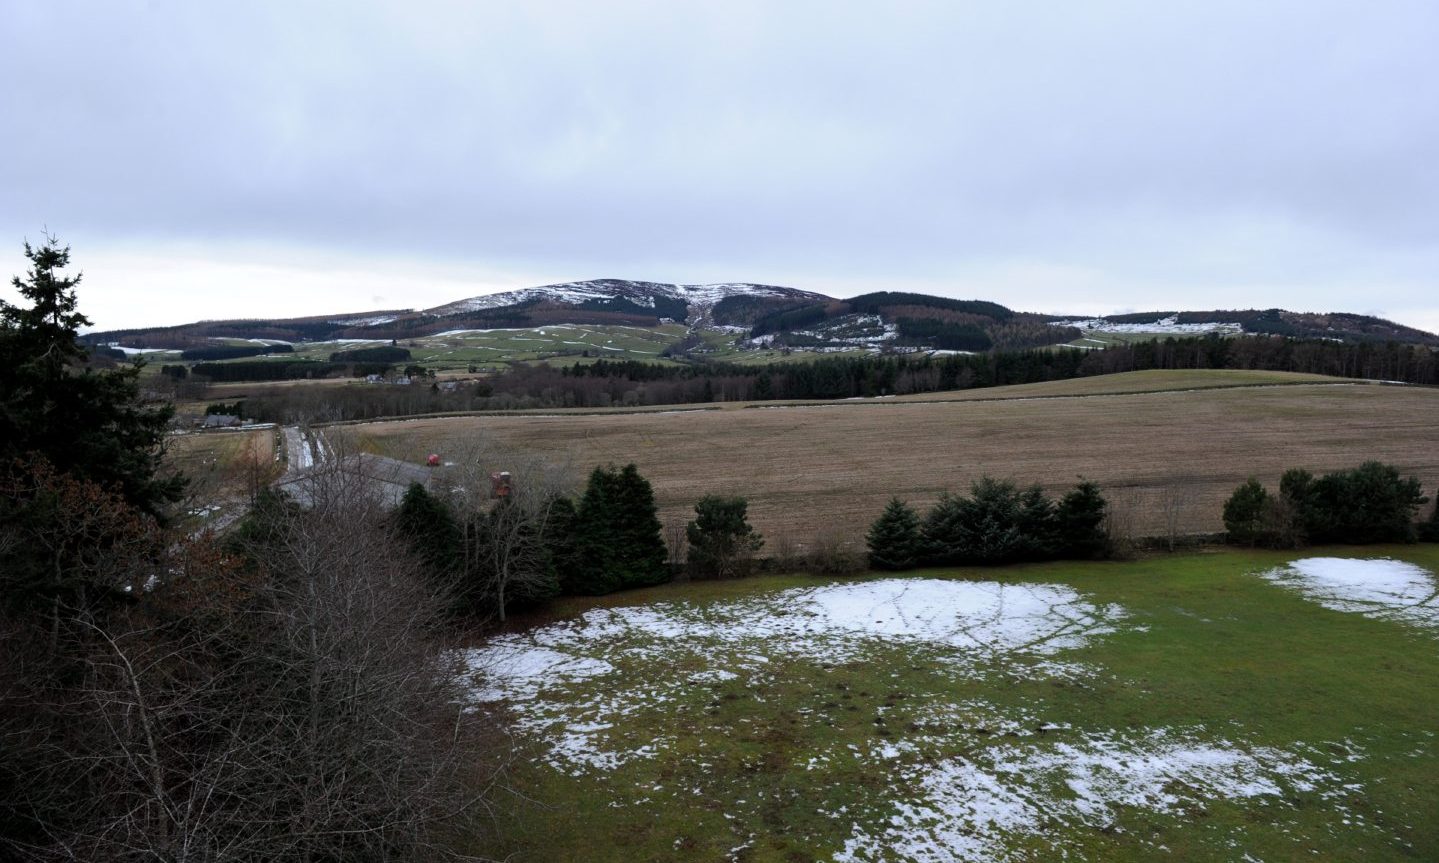 The view from the top of Tillycairn Castle during winter, with trees, snowy fields and hills in the distance